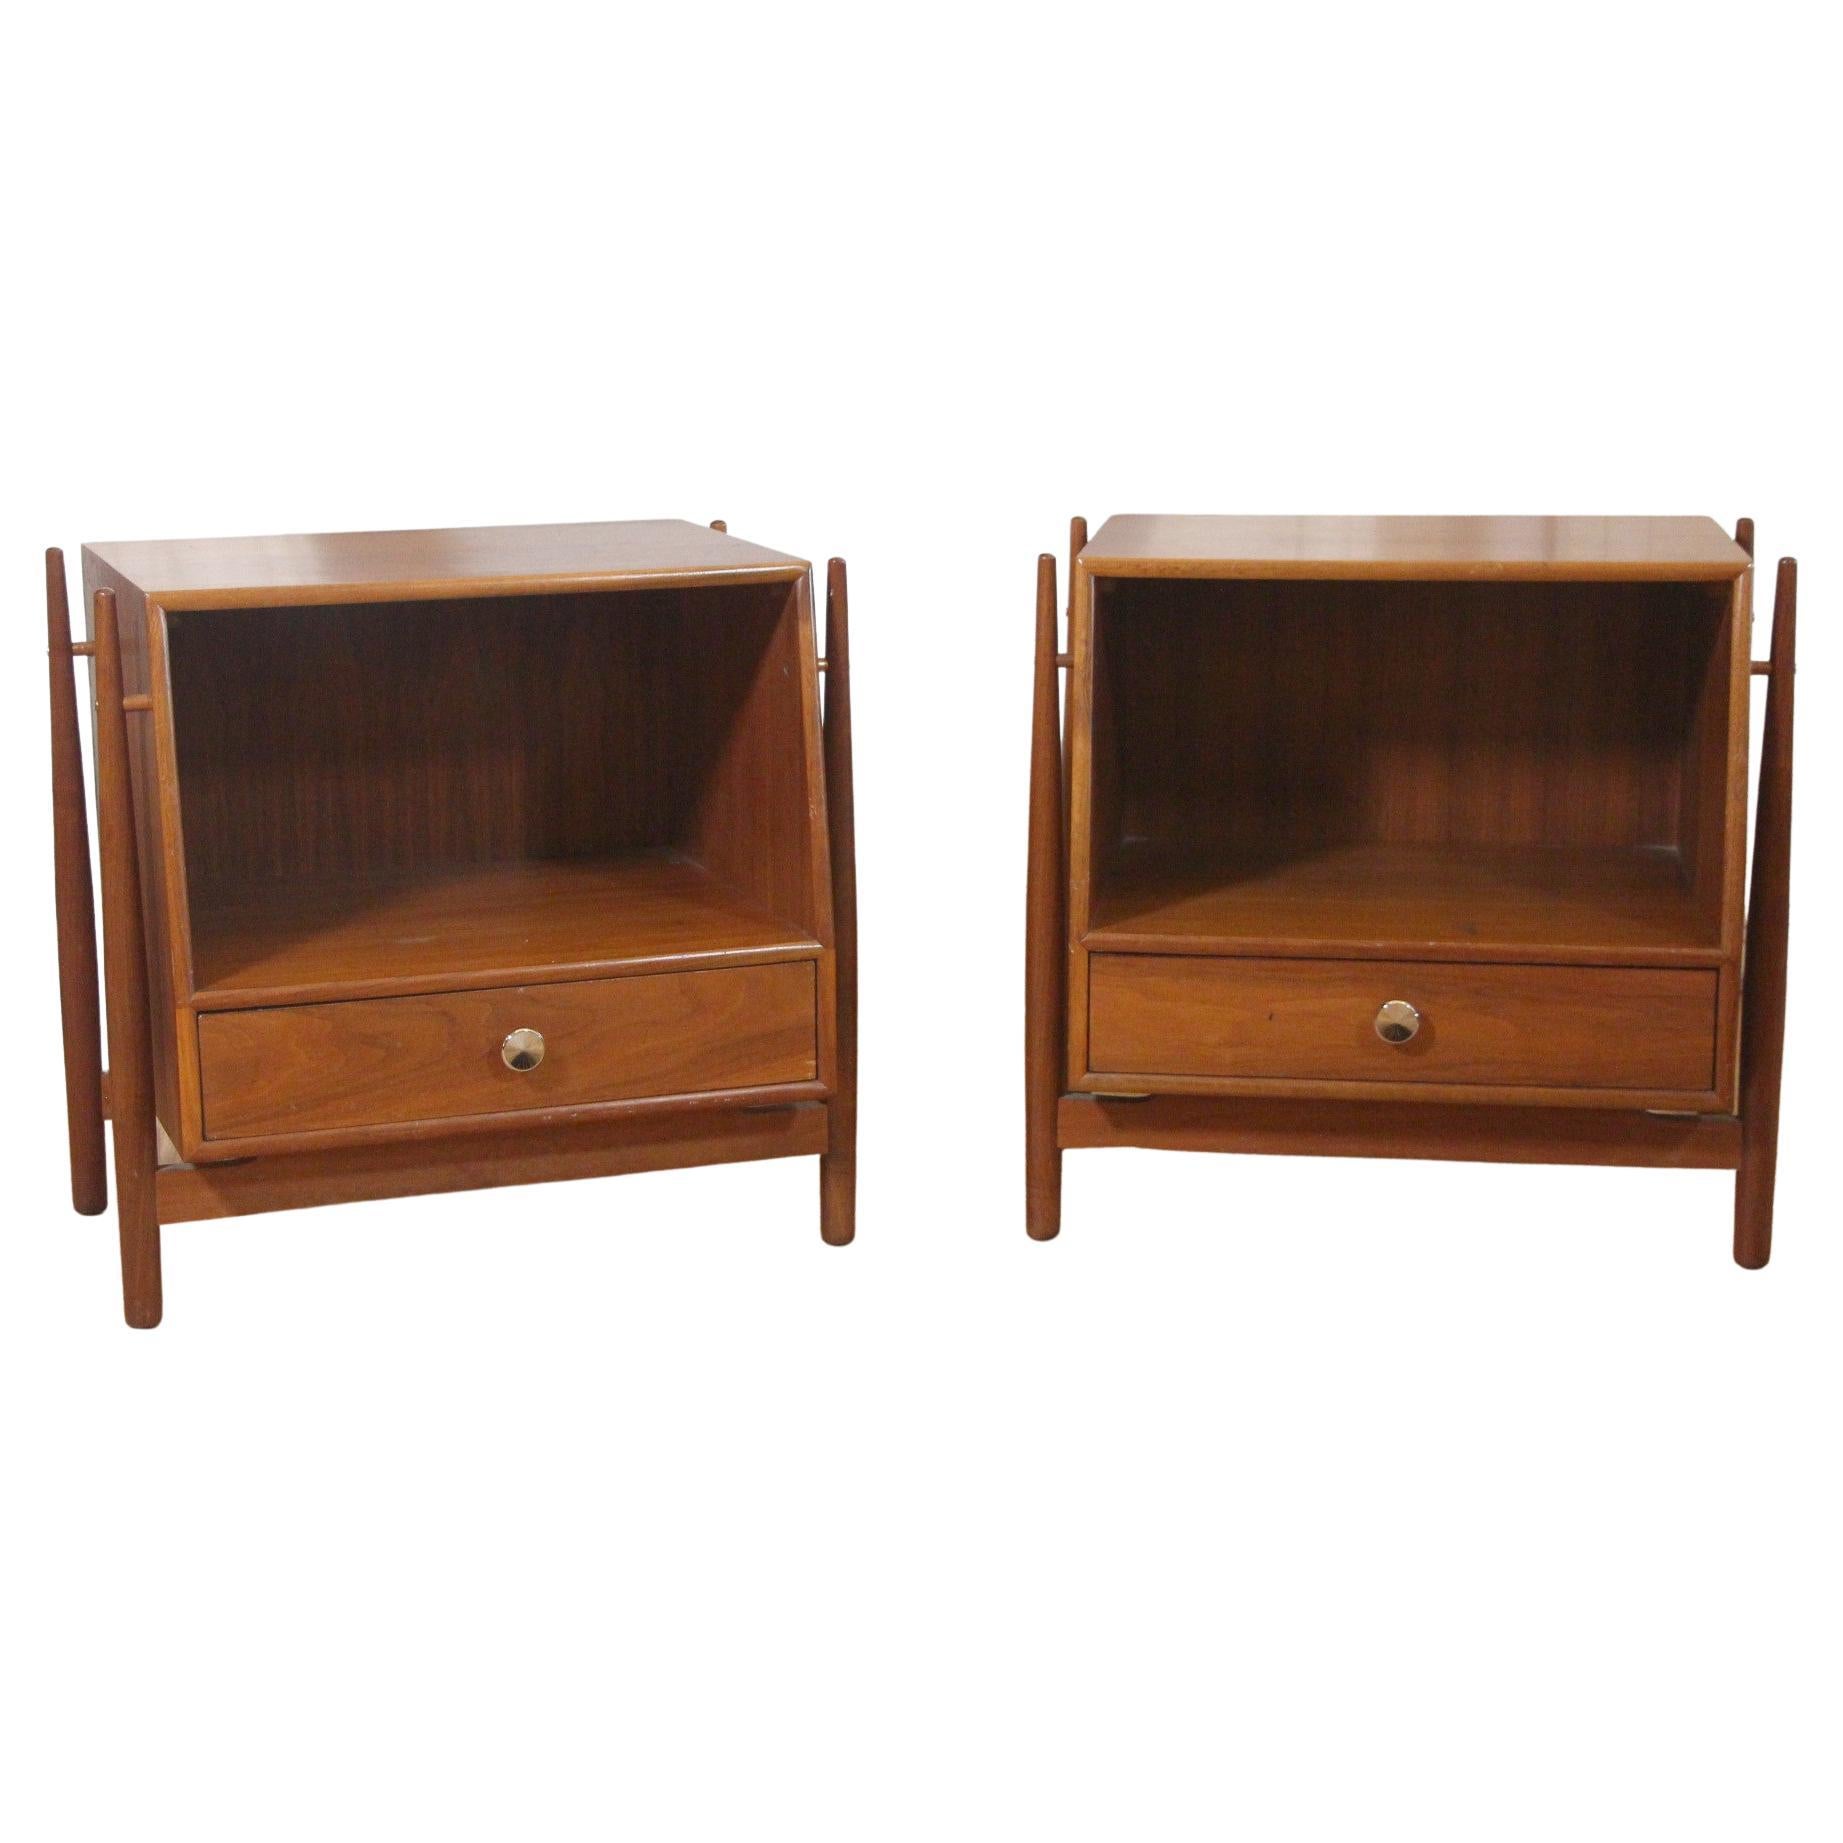 Drexel Declaration Floating Cube Night Stands by Kipp Stewart, Pair from 1960